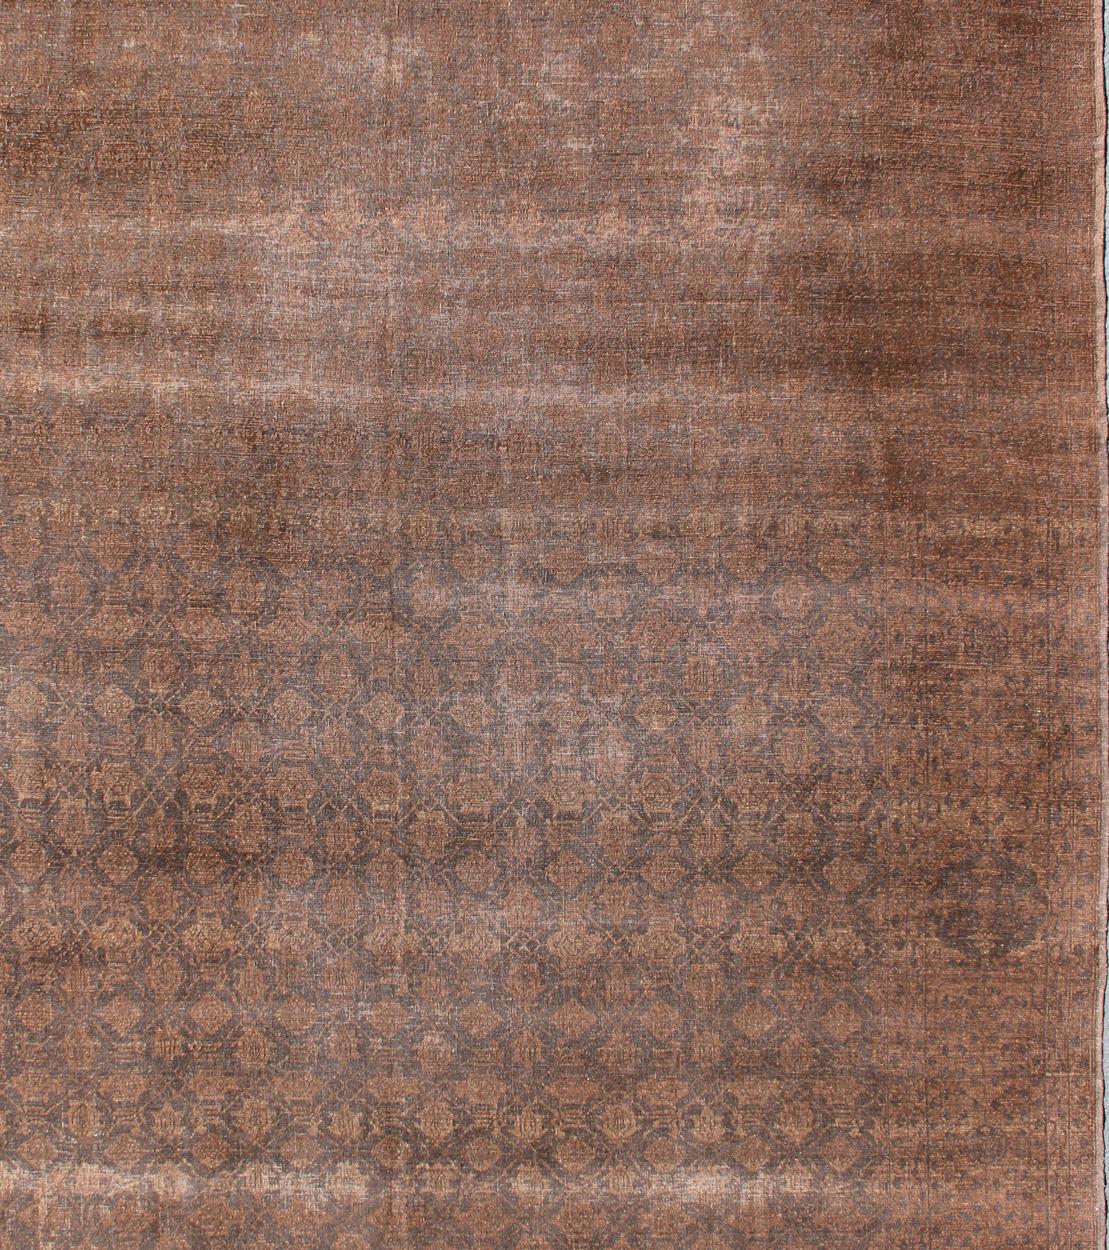 Hand-Knotted All-Over Design Turkish Ottoman Design Rug in Dark Chocolate Brown